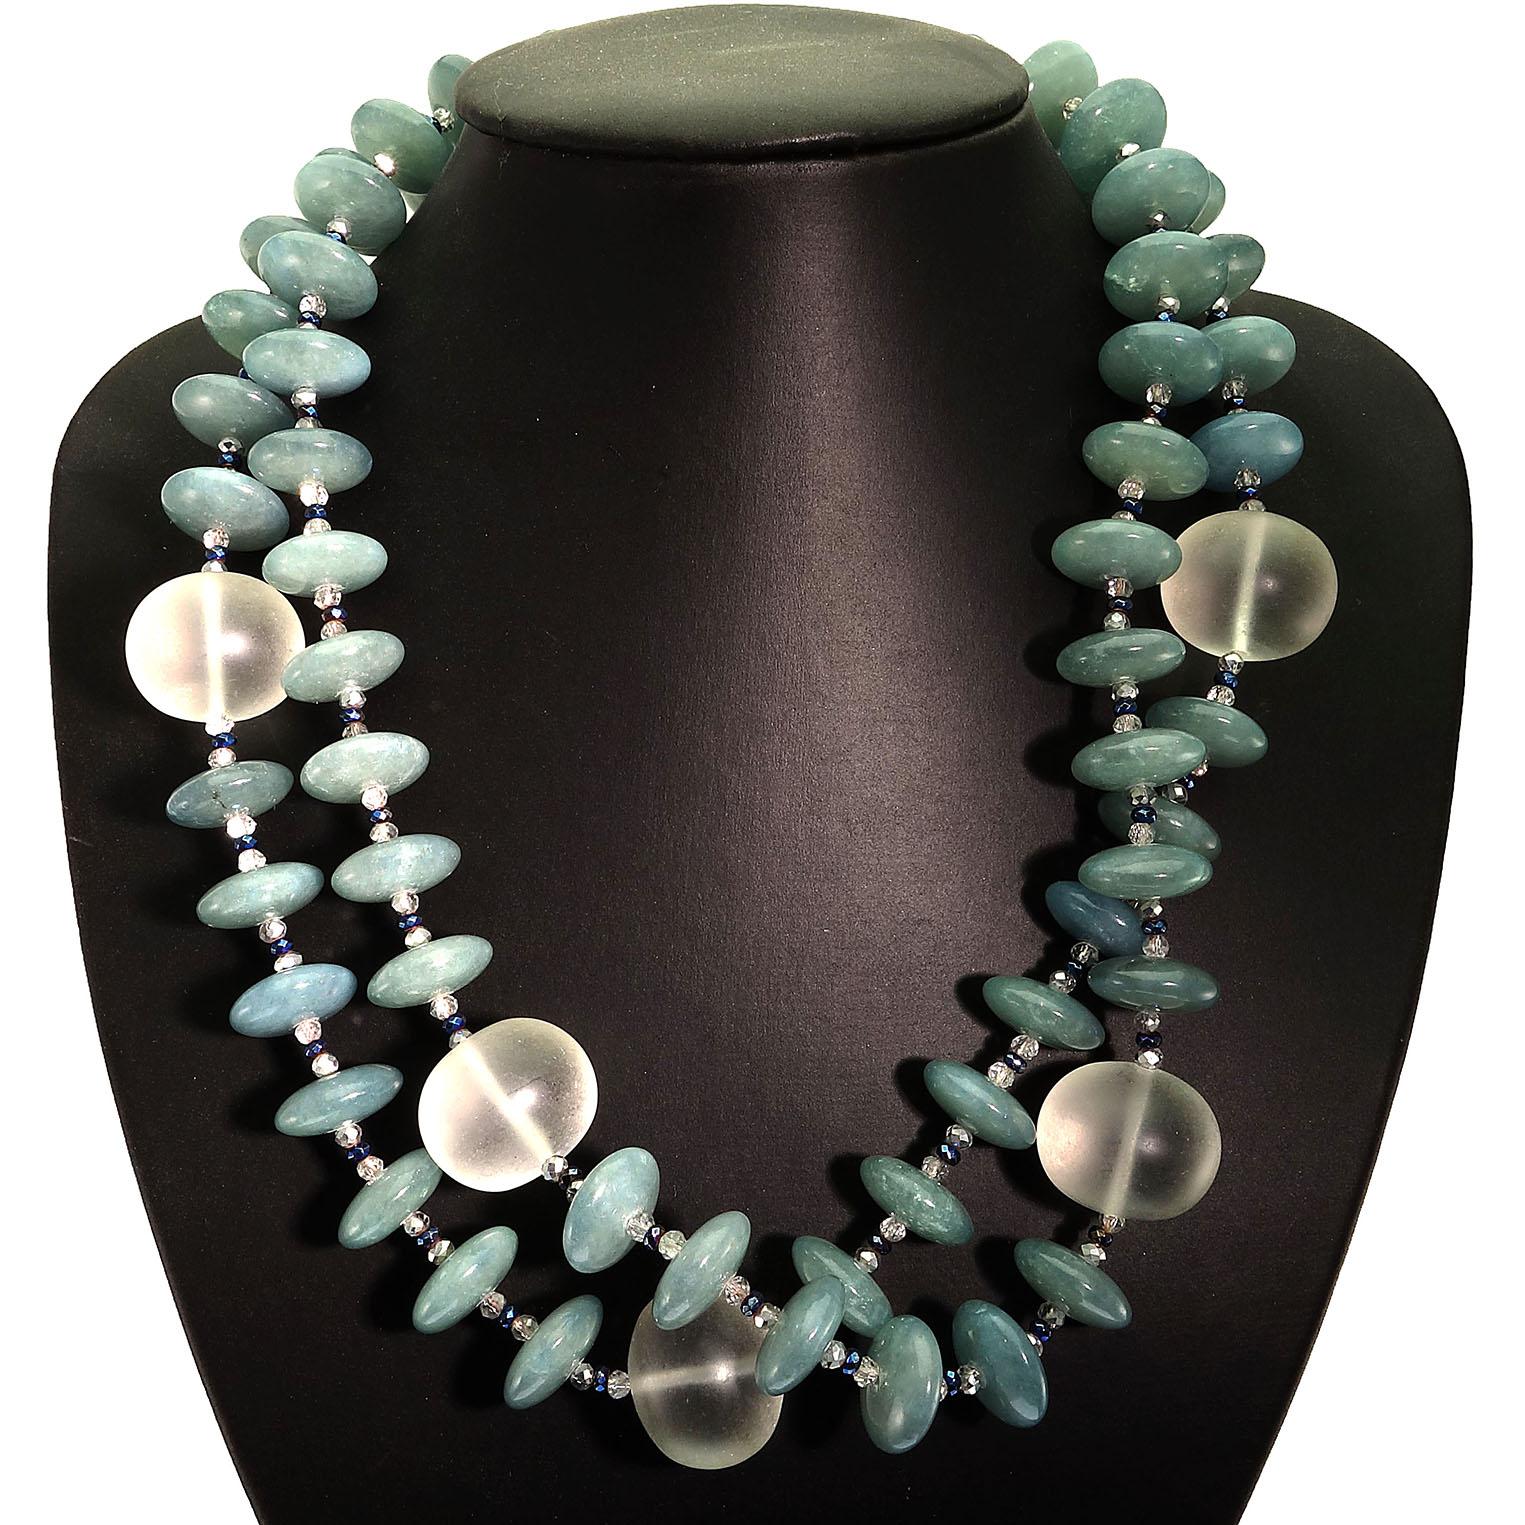 Bead AJD 20 Inch Necklace of Aquamarine Accented with Frosted Quartz March Birthstone